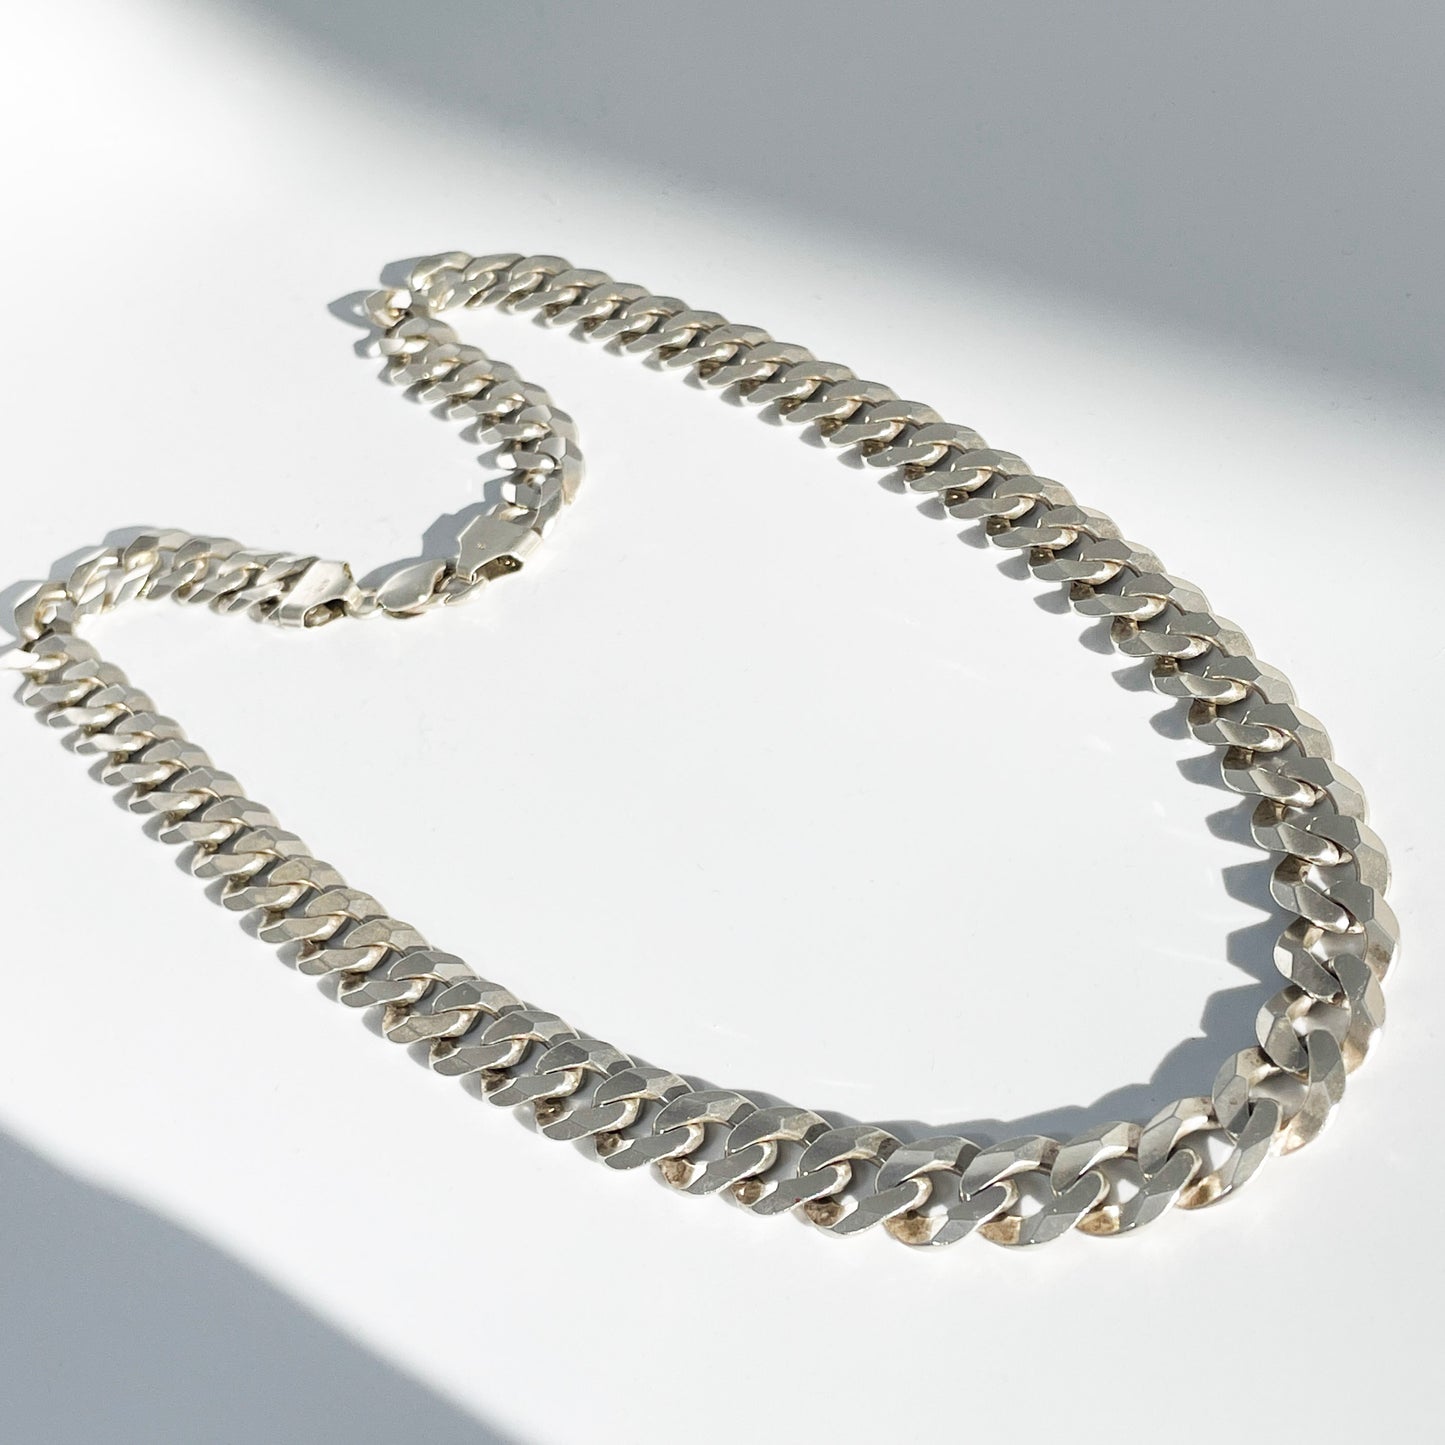 Chunky Sterling Silver Chain - Necklace (Vintage)